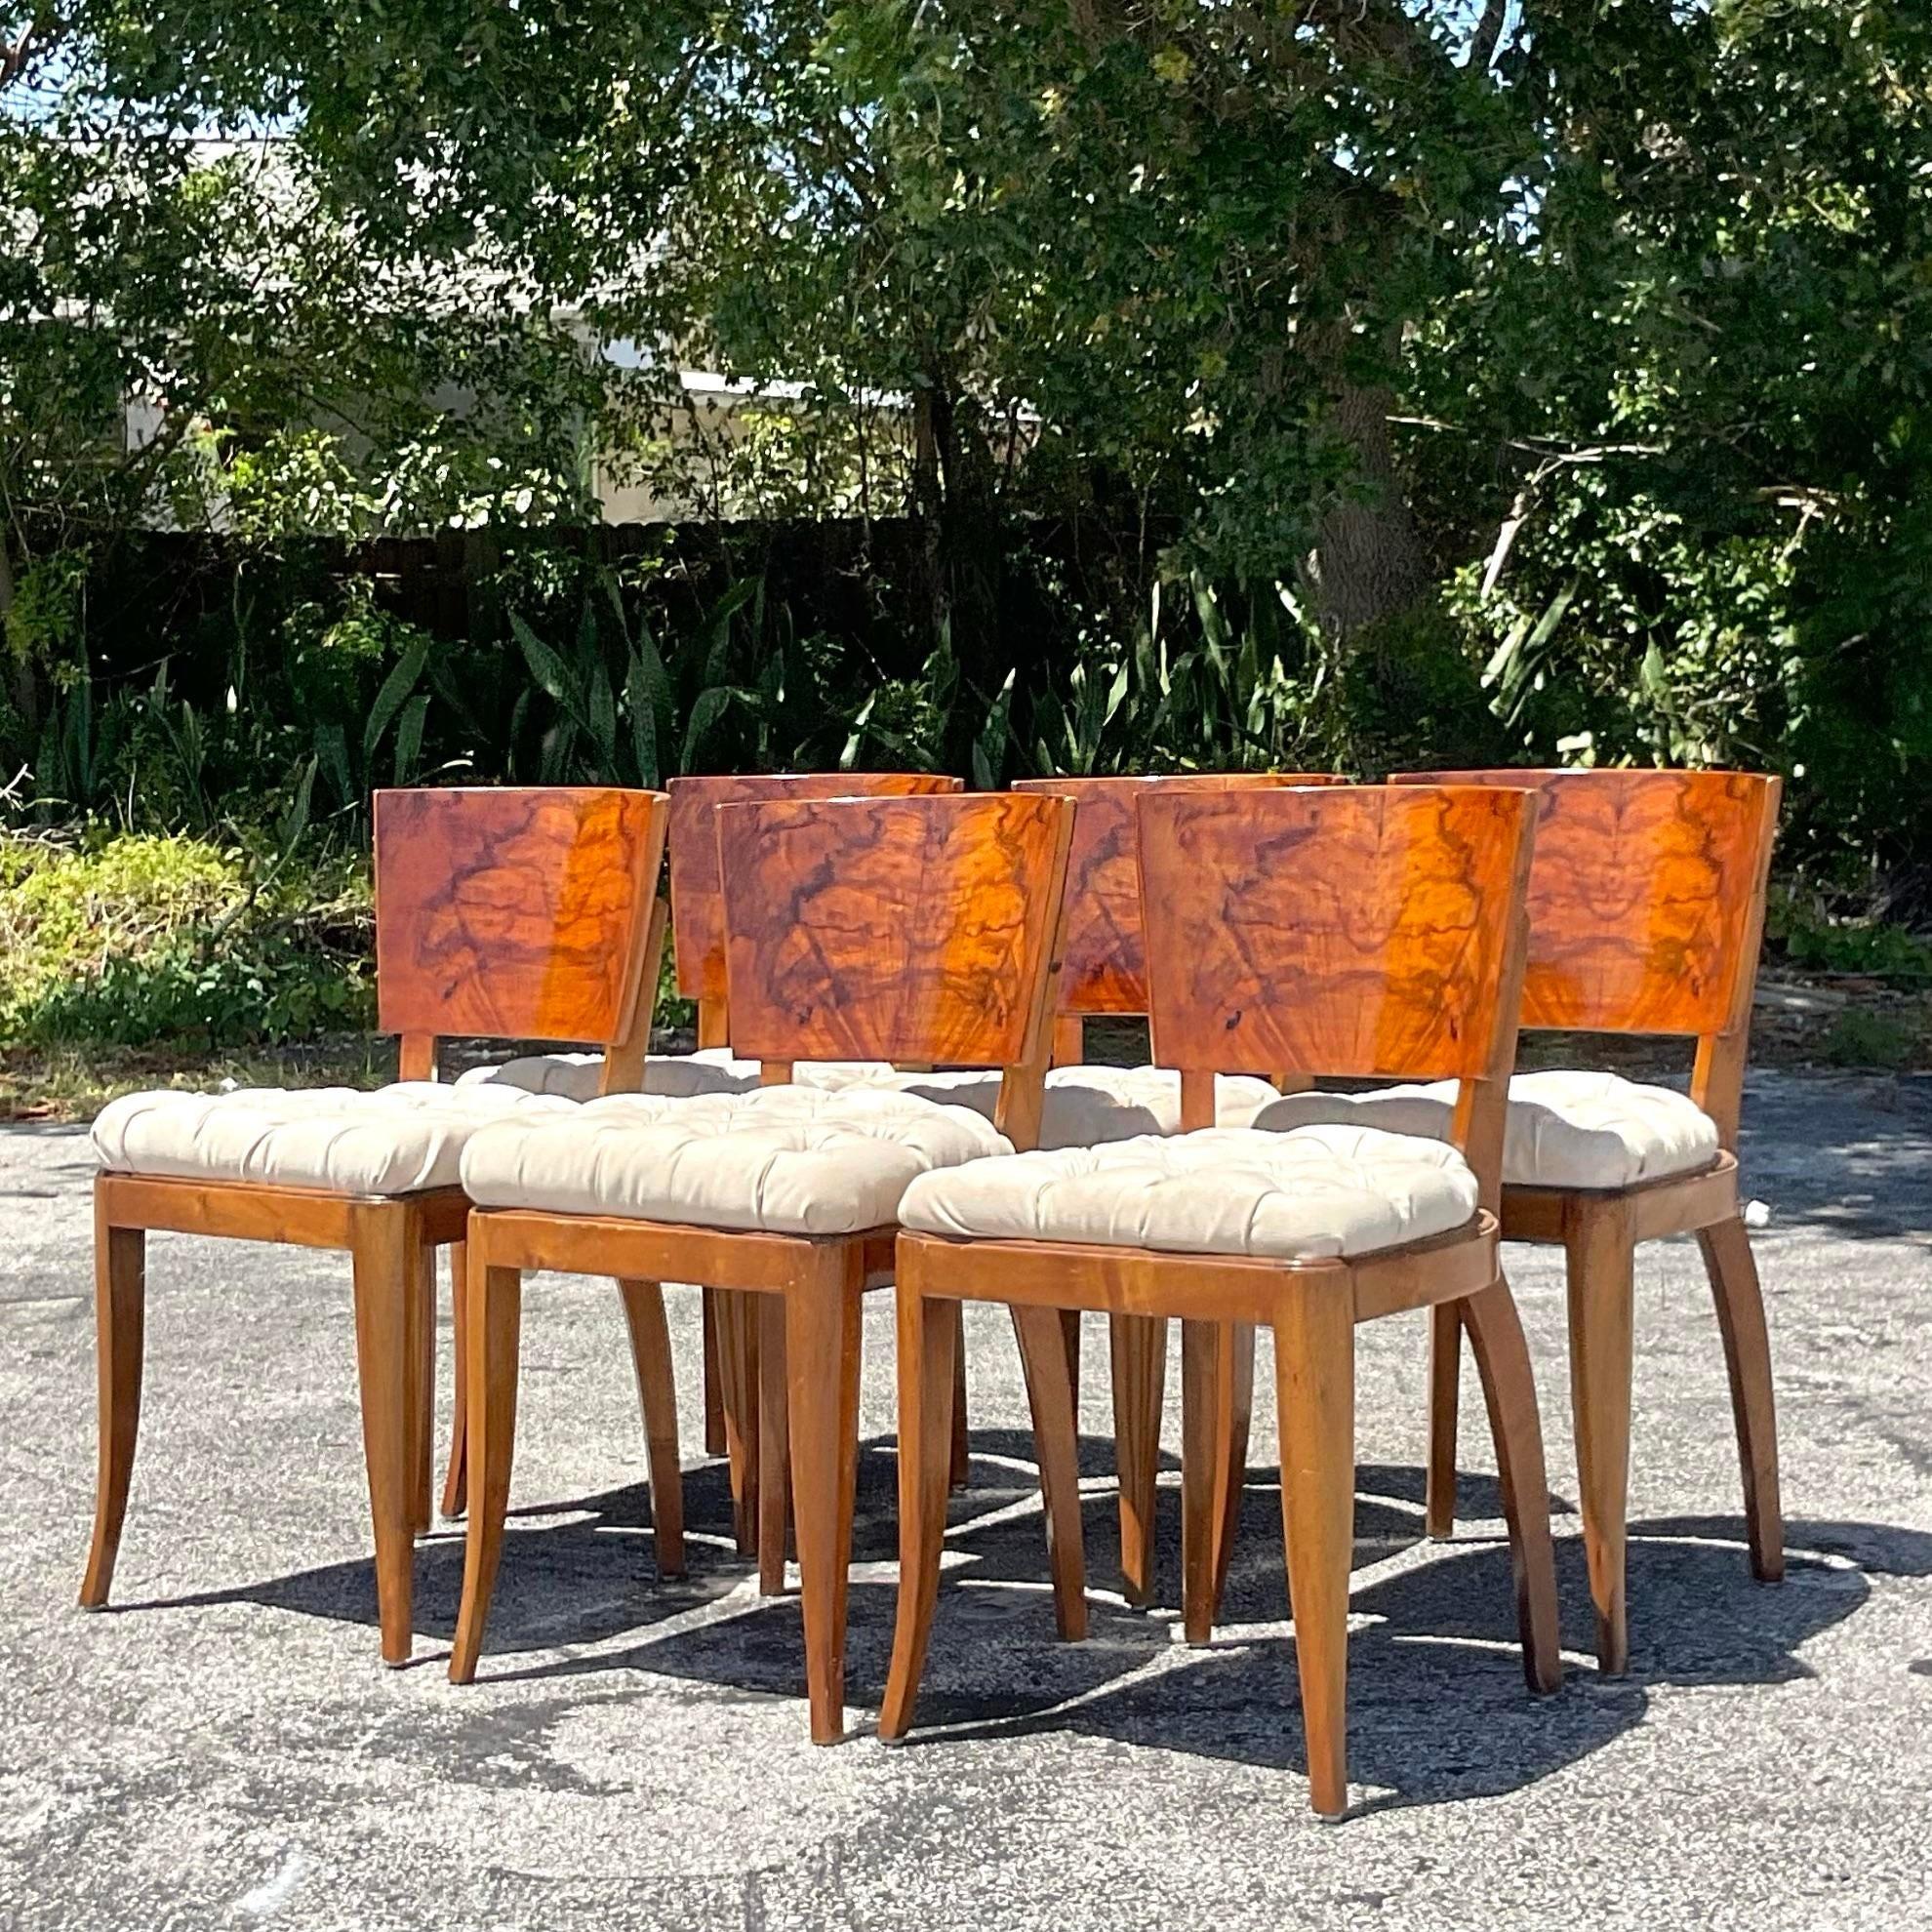 Vintage Deco Burl Wood Dining Chairs - Set of 6 For Sale 5